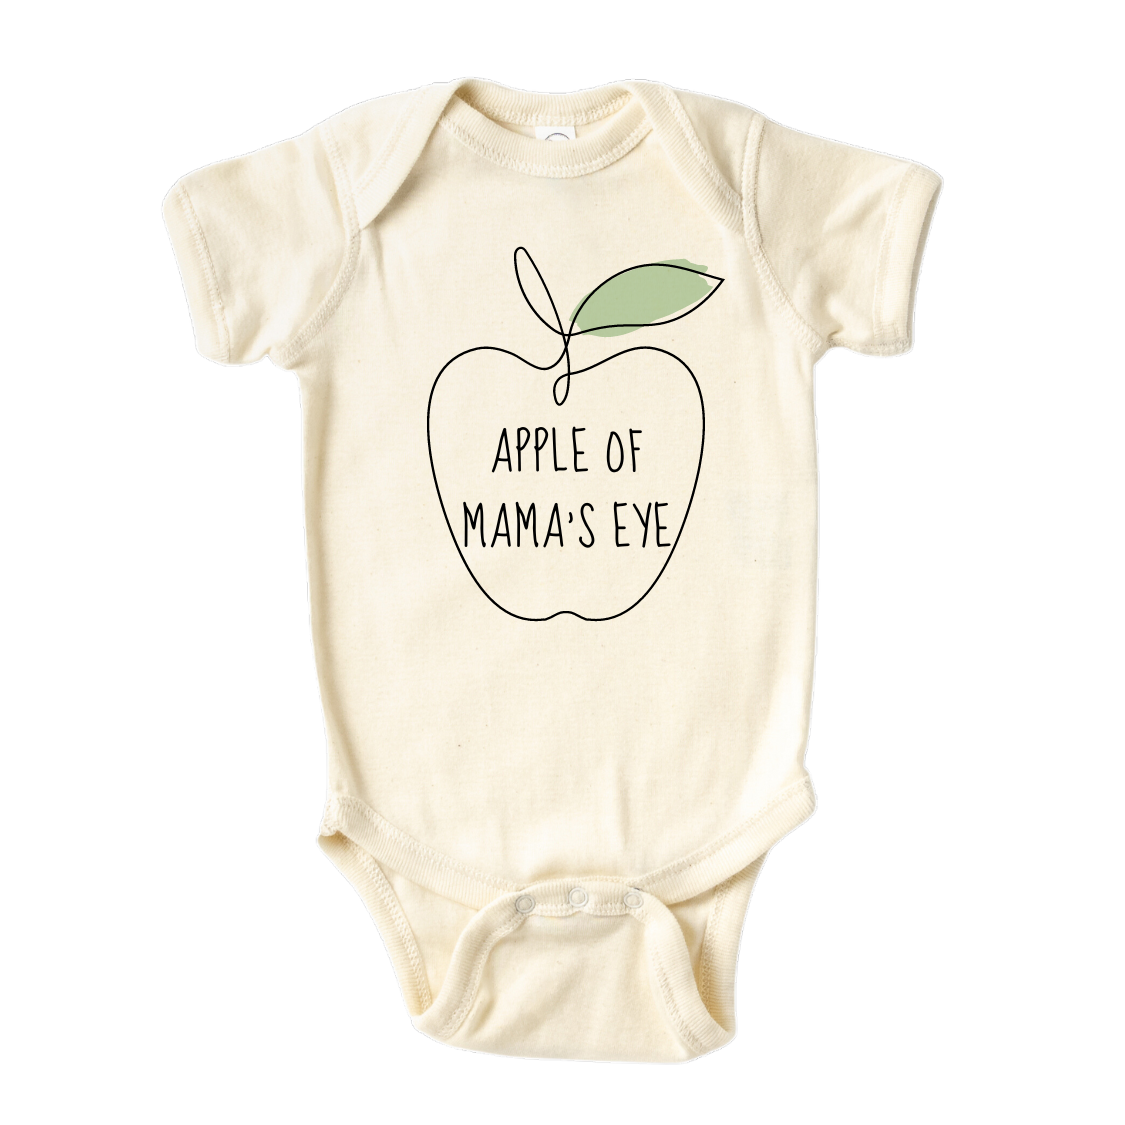 Cute Baby Onesie® Apple of Mama's Eye Shirt Premium Custom Baby Clothes Gift for Mom Mother's Day Gift